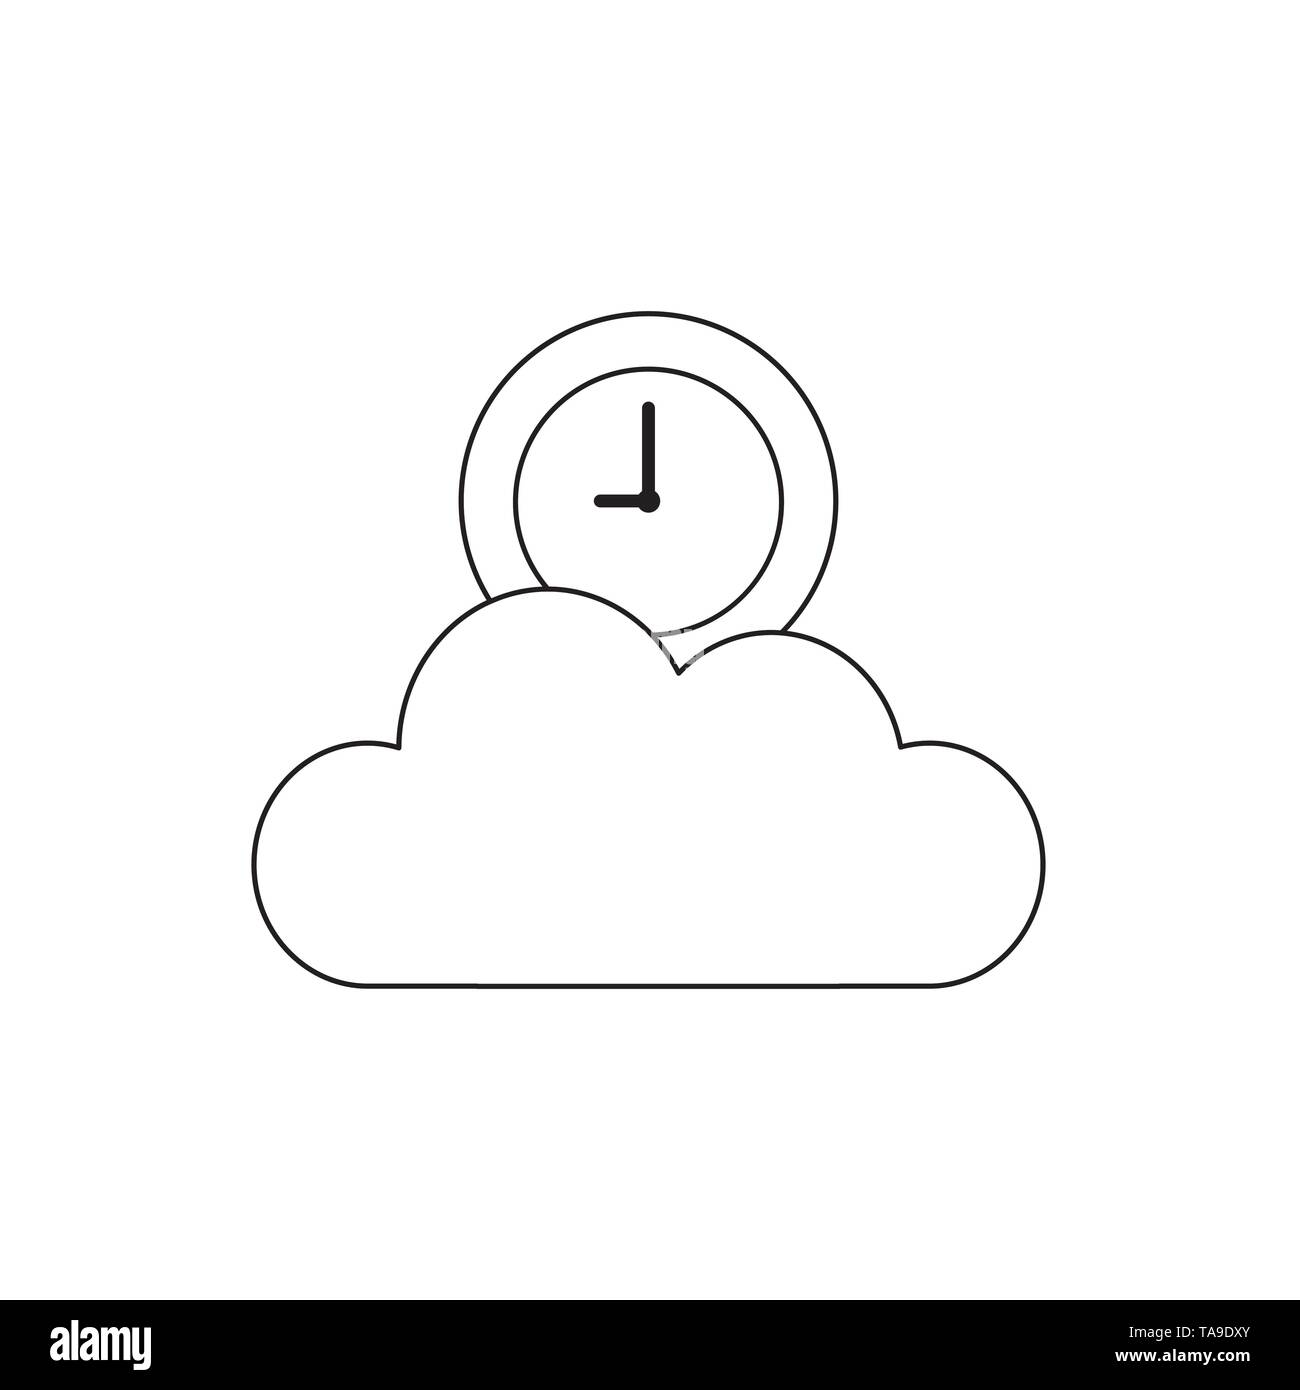 Vector icon concept of clock on cloud. Black outlines. Stock Vector